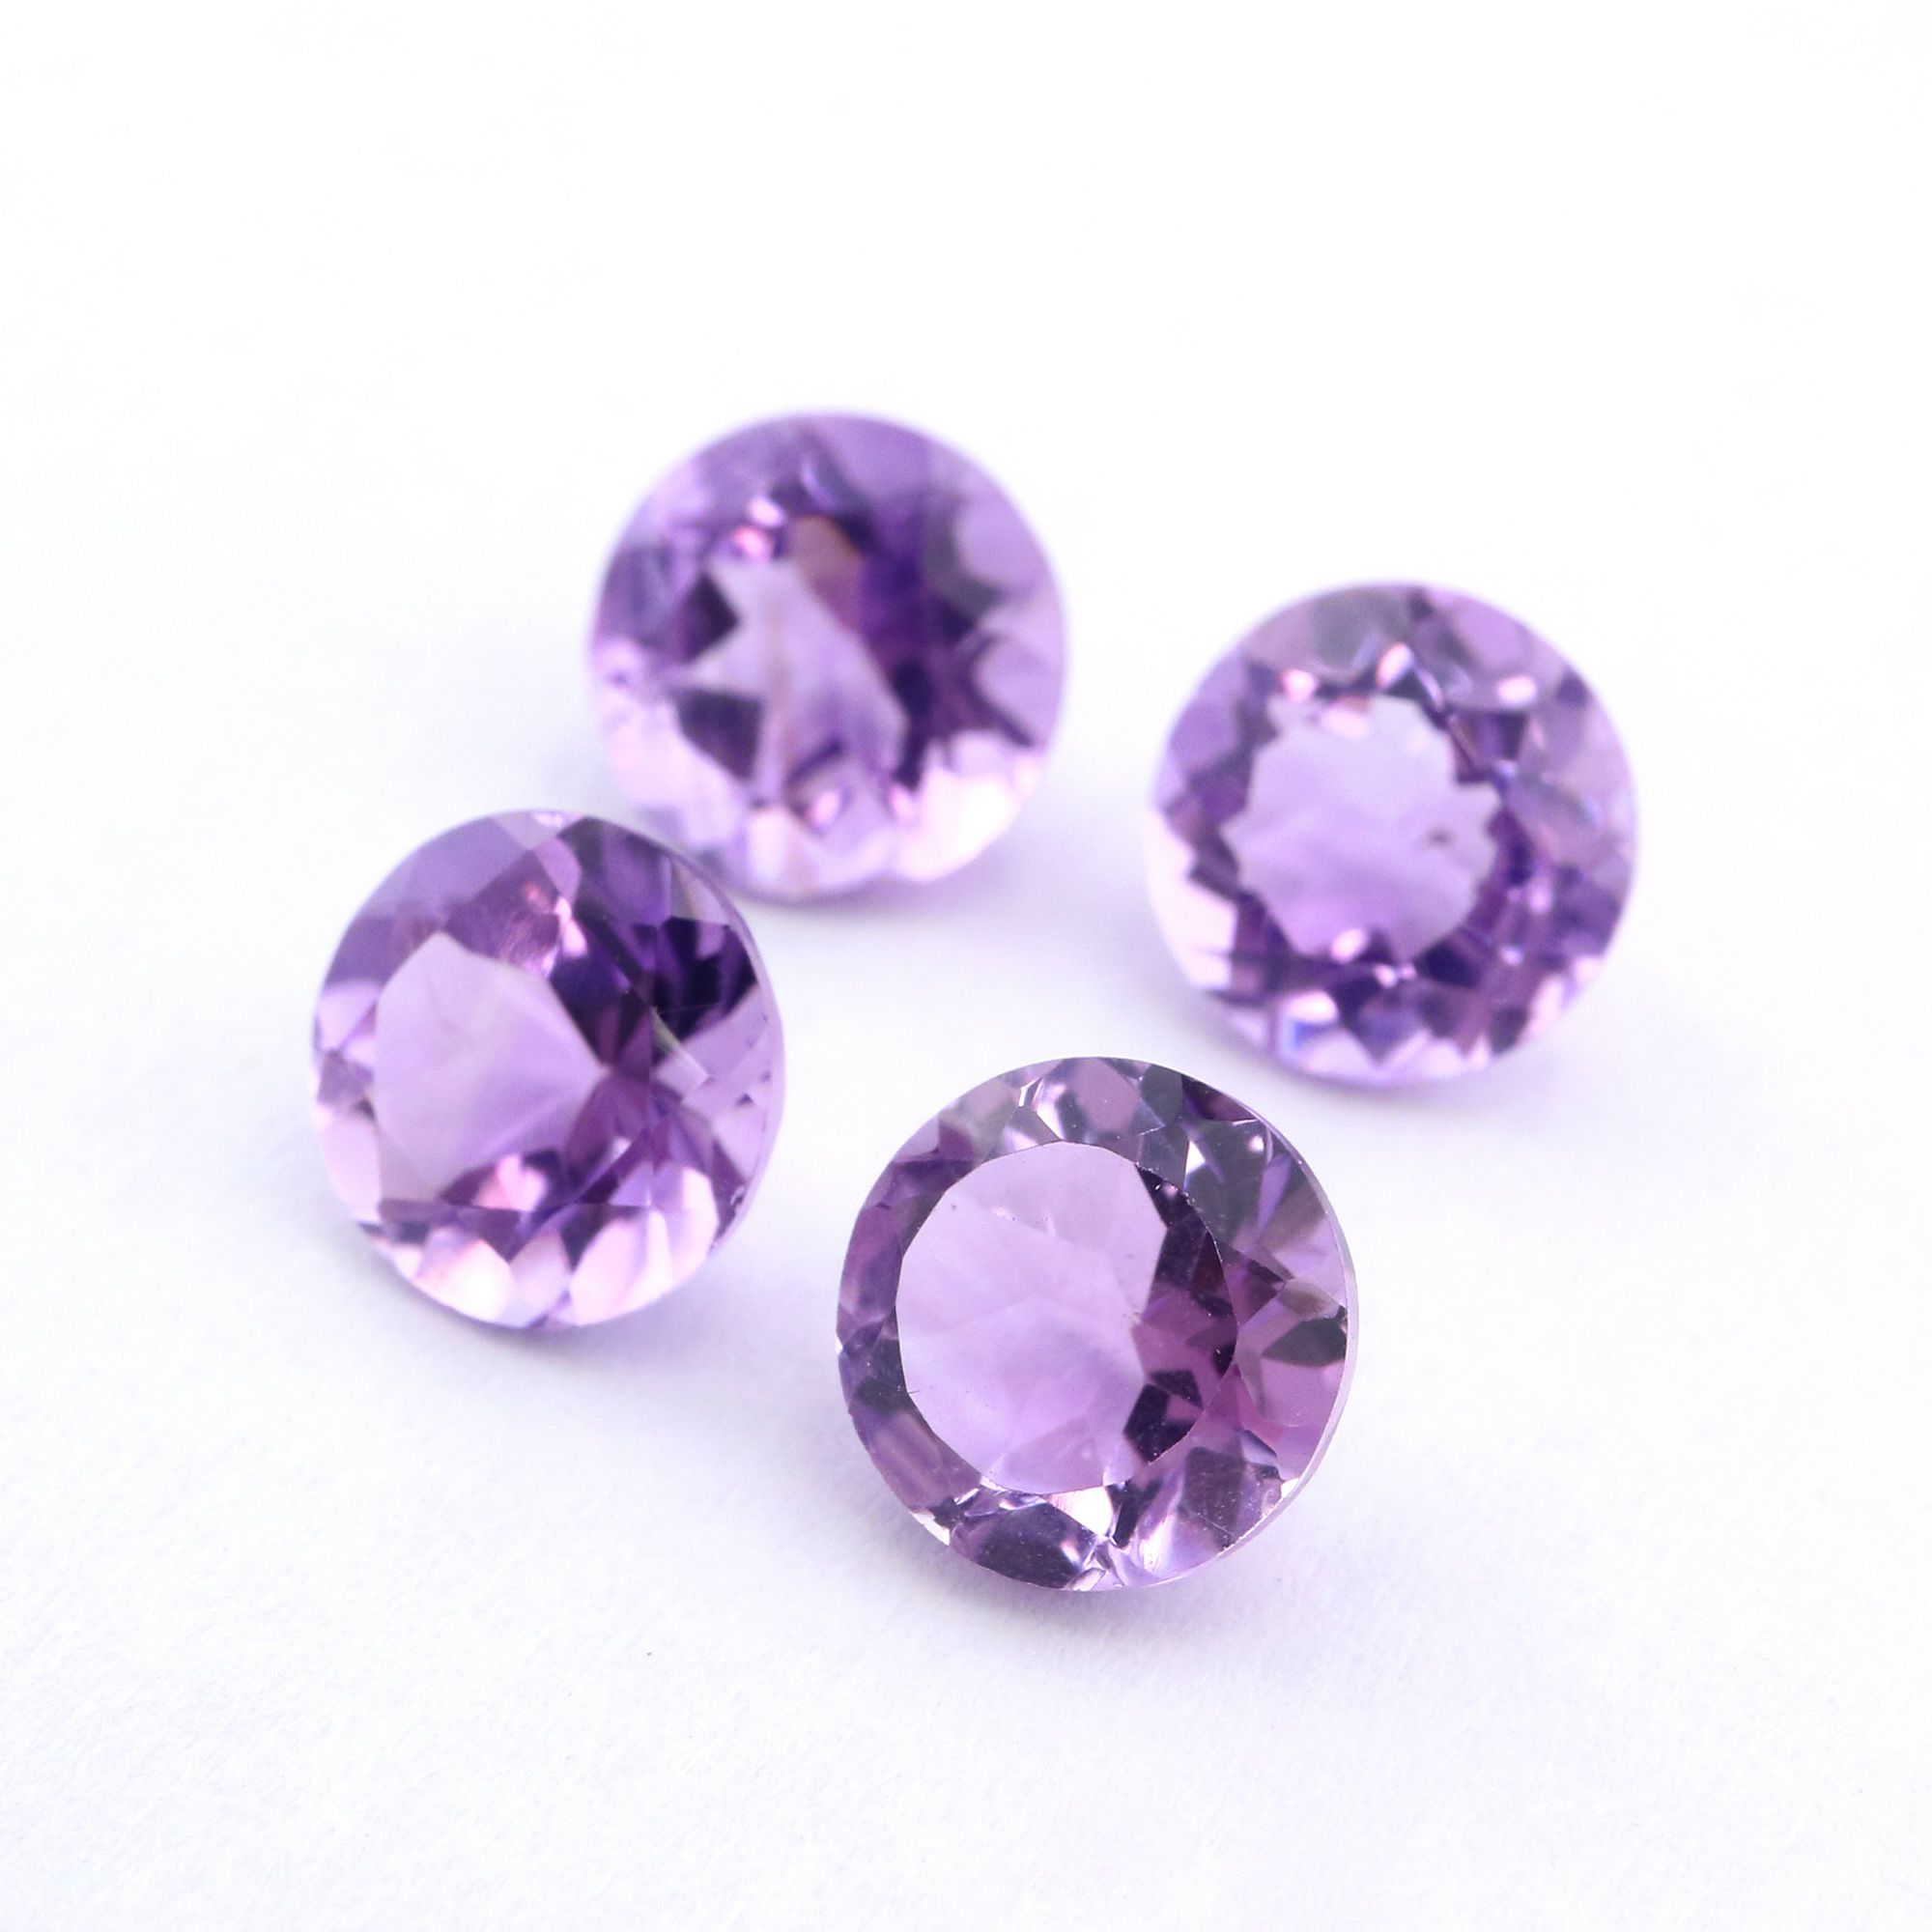 1Pcs Round Purple Amethyst February Birthstone Faceted Cut Loose Gemstone Nature Semi Precious Stone DIY Jewelry Supplies 4110169 - Click Image to Close